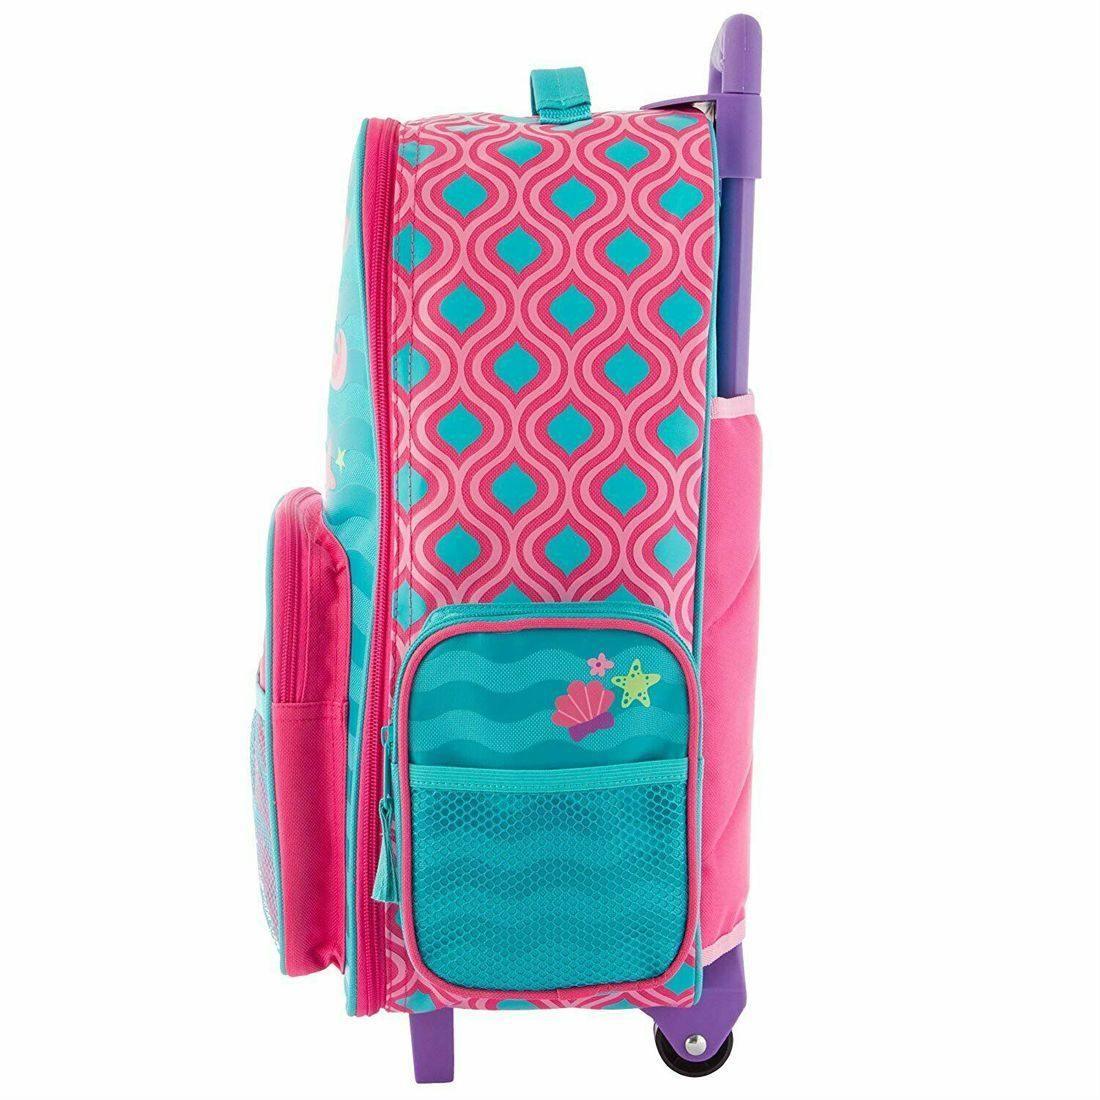 Stephen Joseph Classic Rolling Luggage 18 inch Mermaid - BumbleToys - 5-7 Years, Backpack, Cecil, Girls, Pre-Order, School Supplies, Stephen Joseph 2023